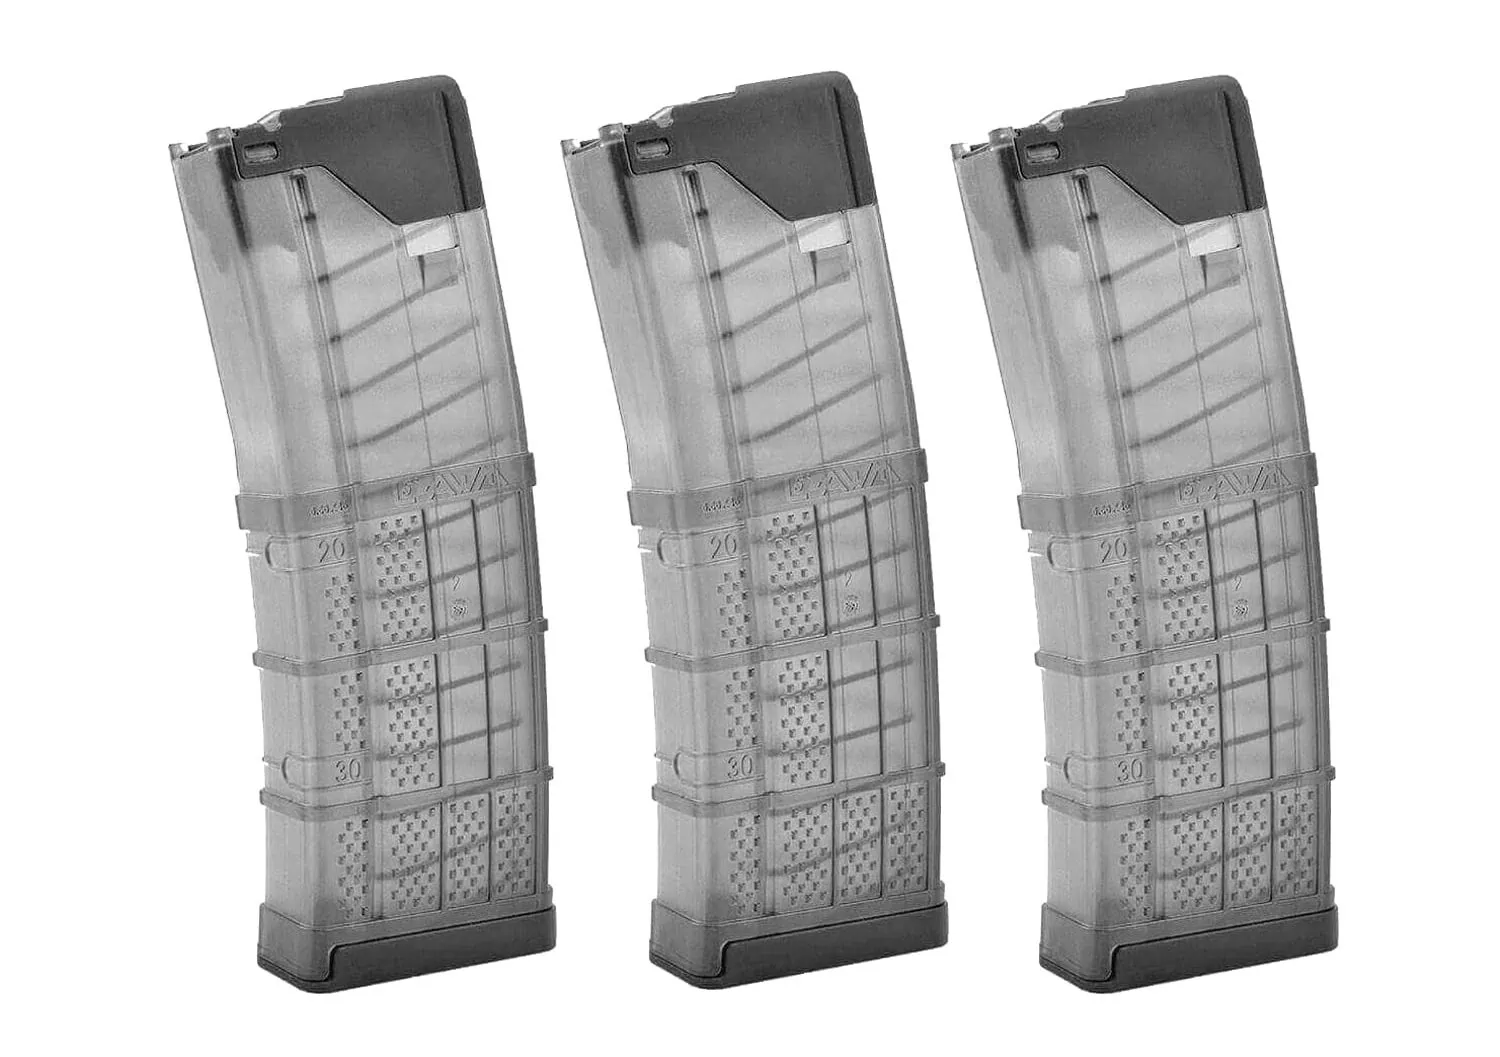 For hog hunting, 30 round mags are a solid choice. Some, like these lancers, let you see how many rounds you have left.